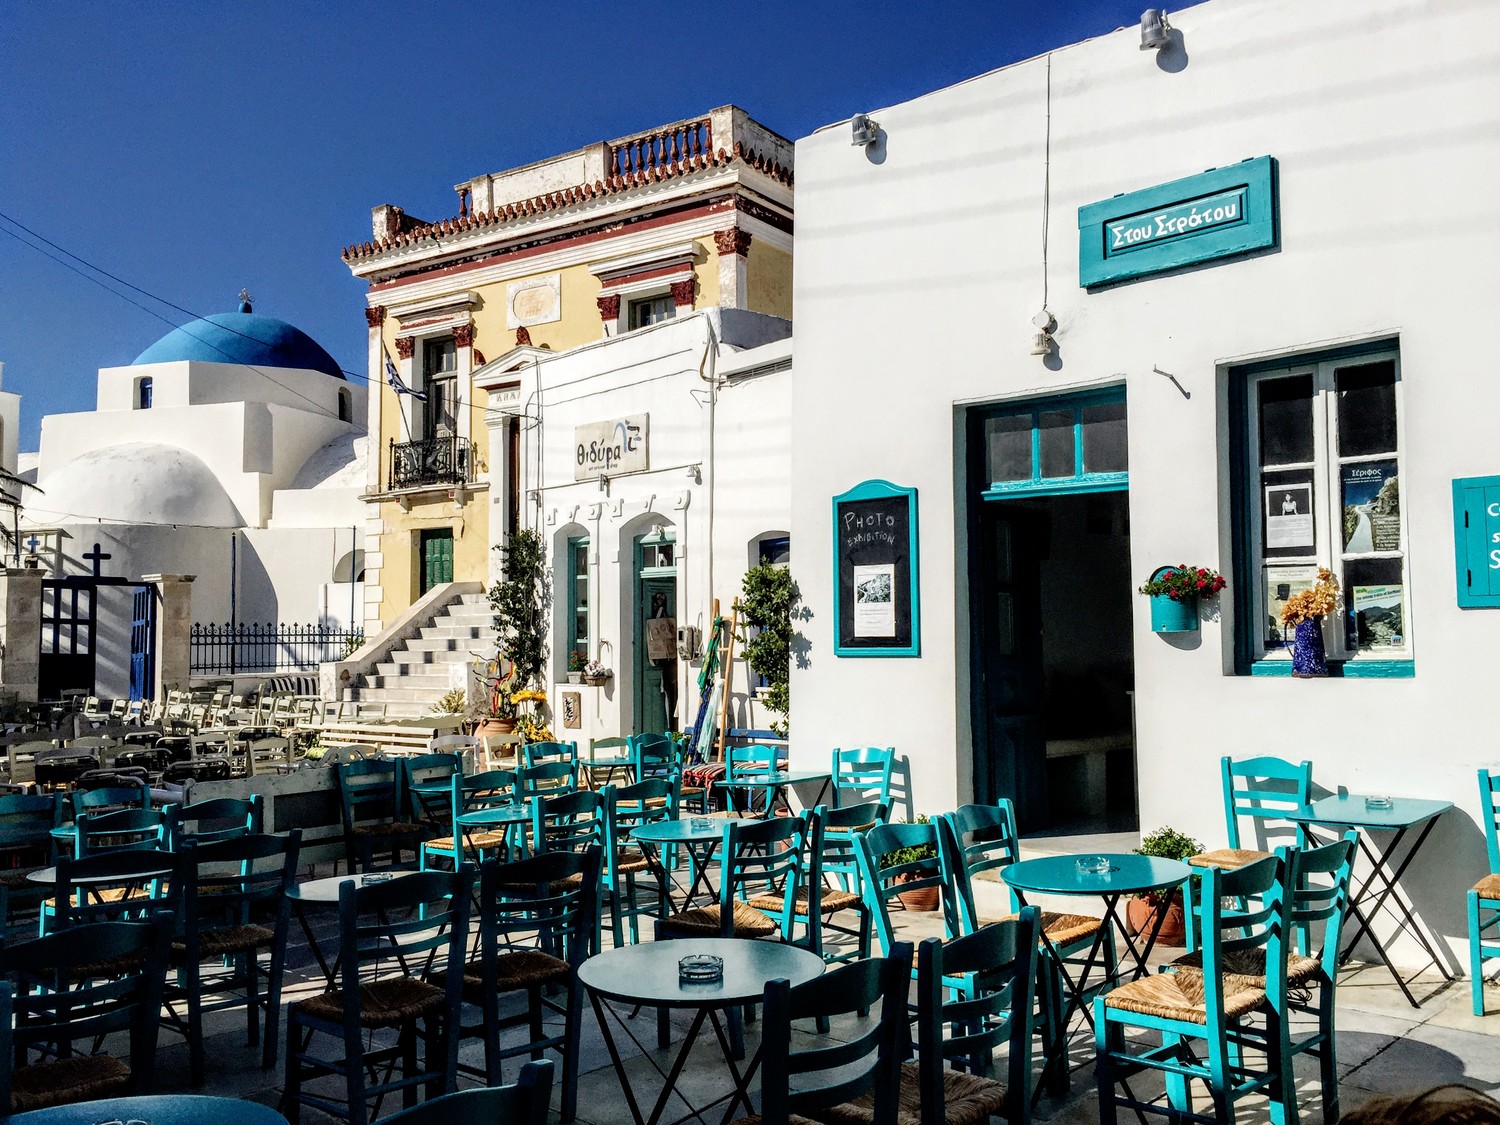 Serifos signature square atop a hill, with "Stou Stratou" traditional café as the main attraction... old day long